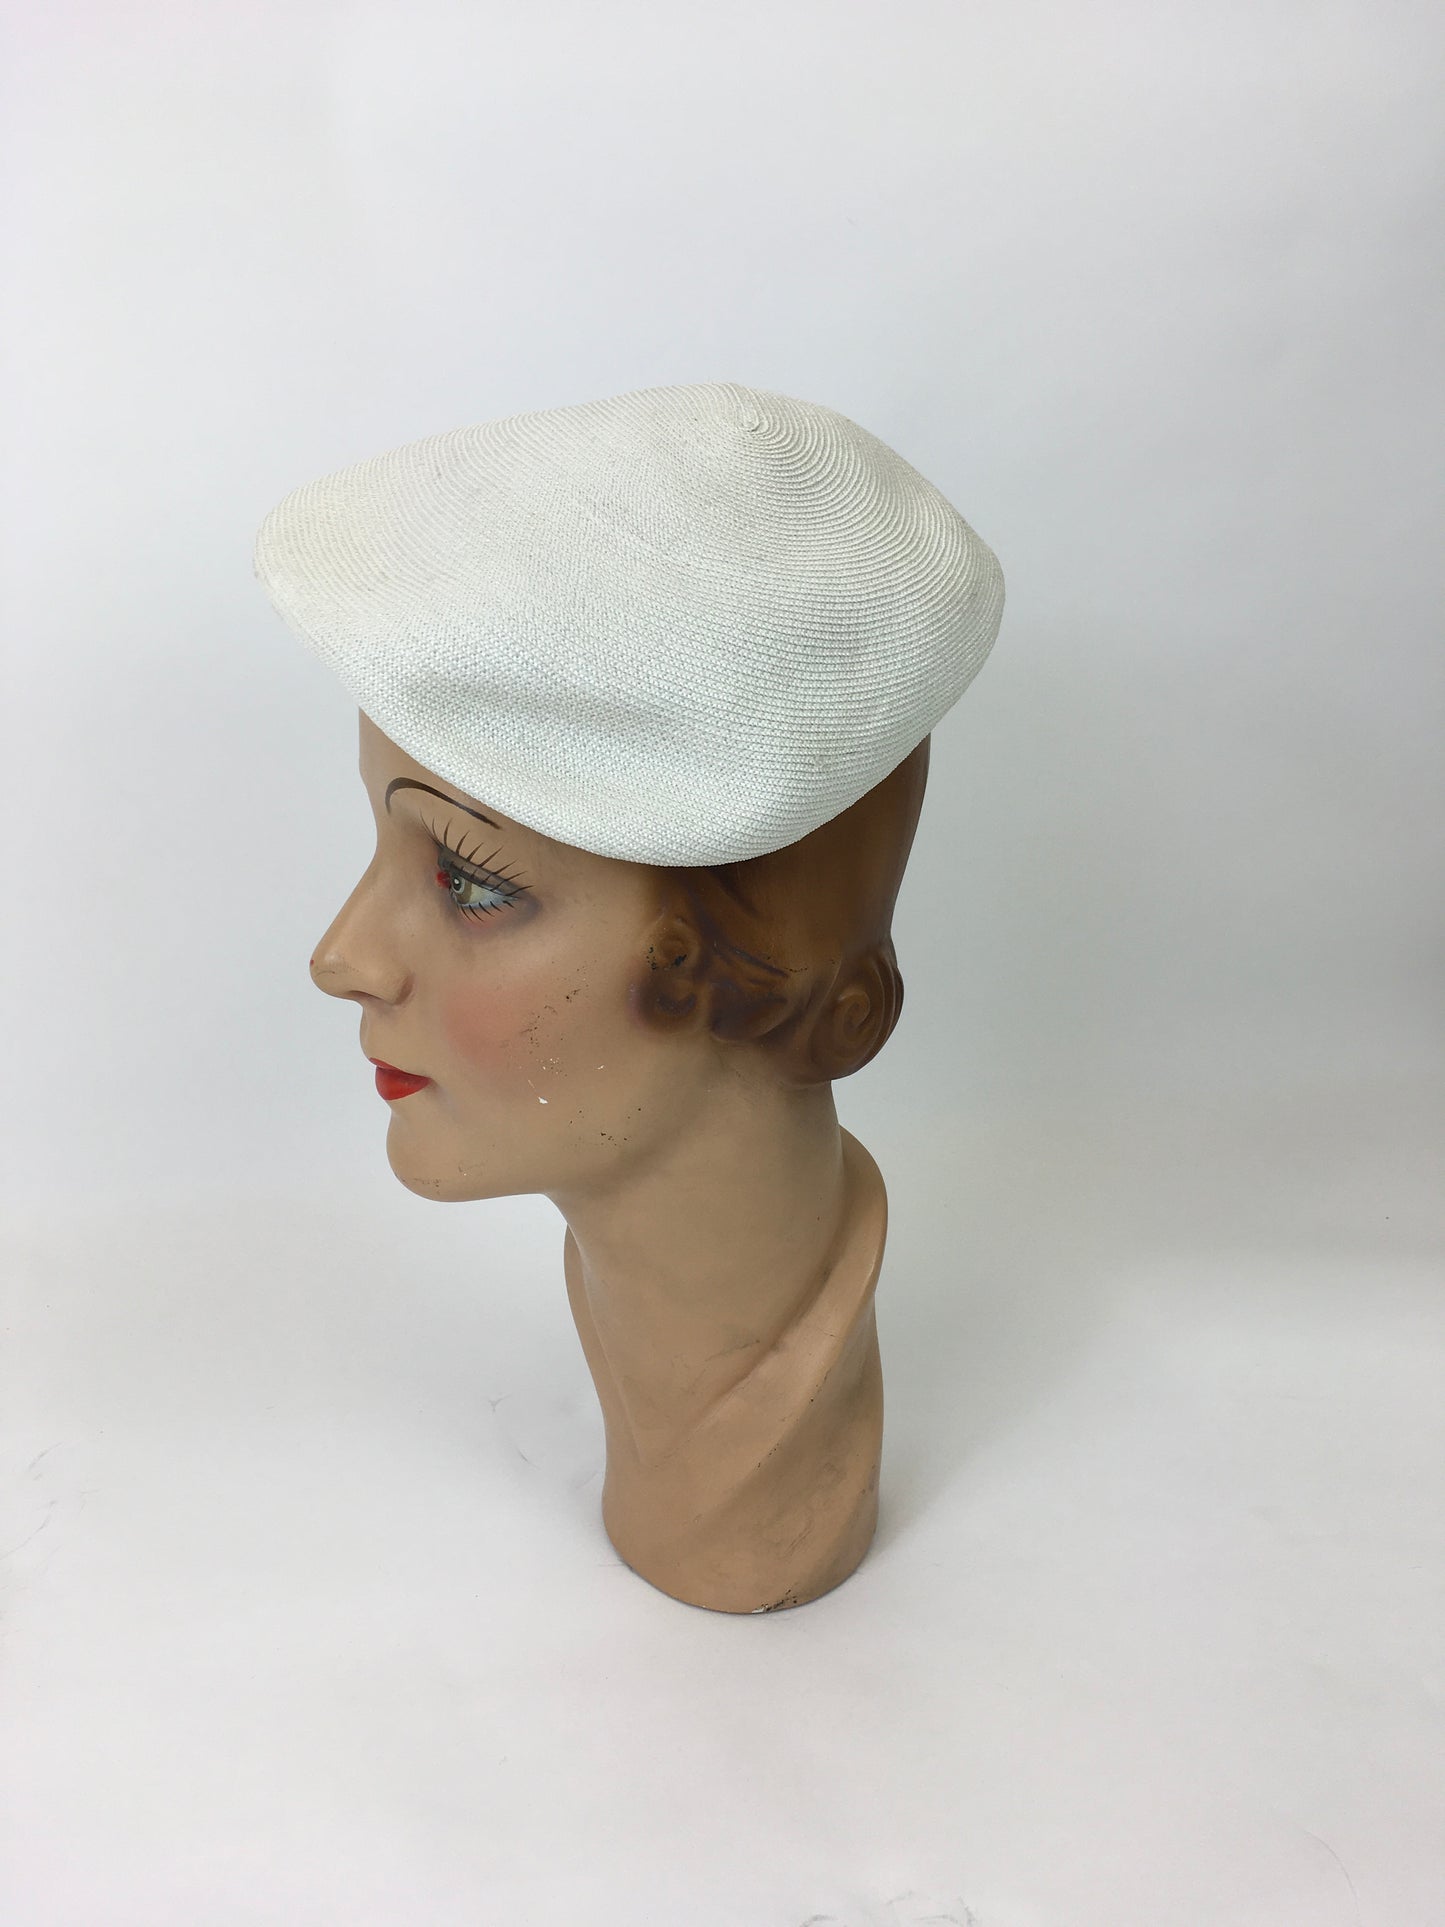 Original 1950’s Simple Yet elegant White Hat - For Chic 50’s Styling